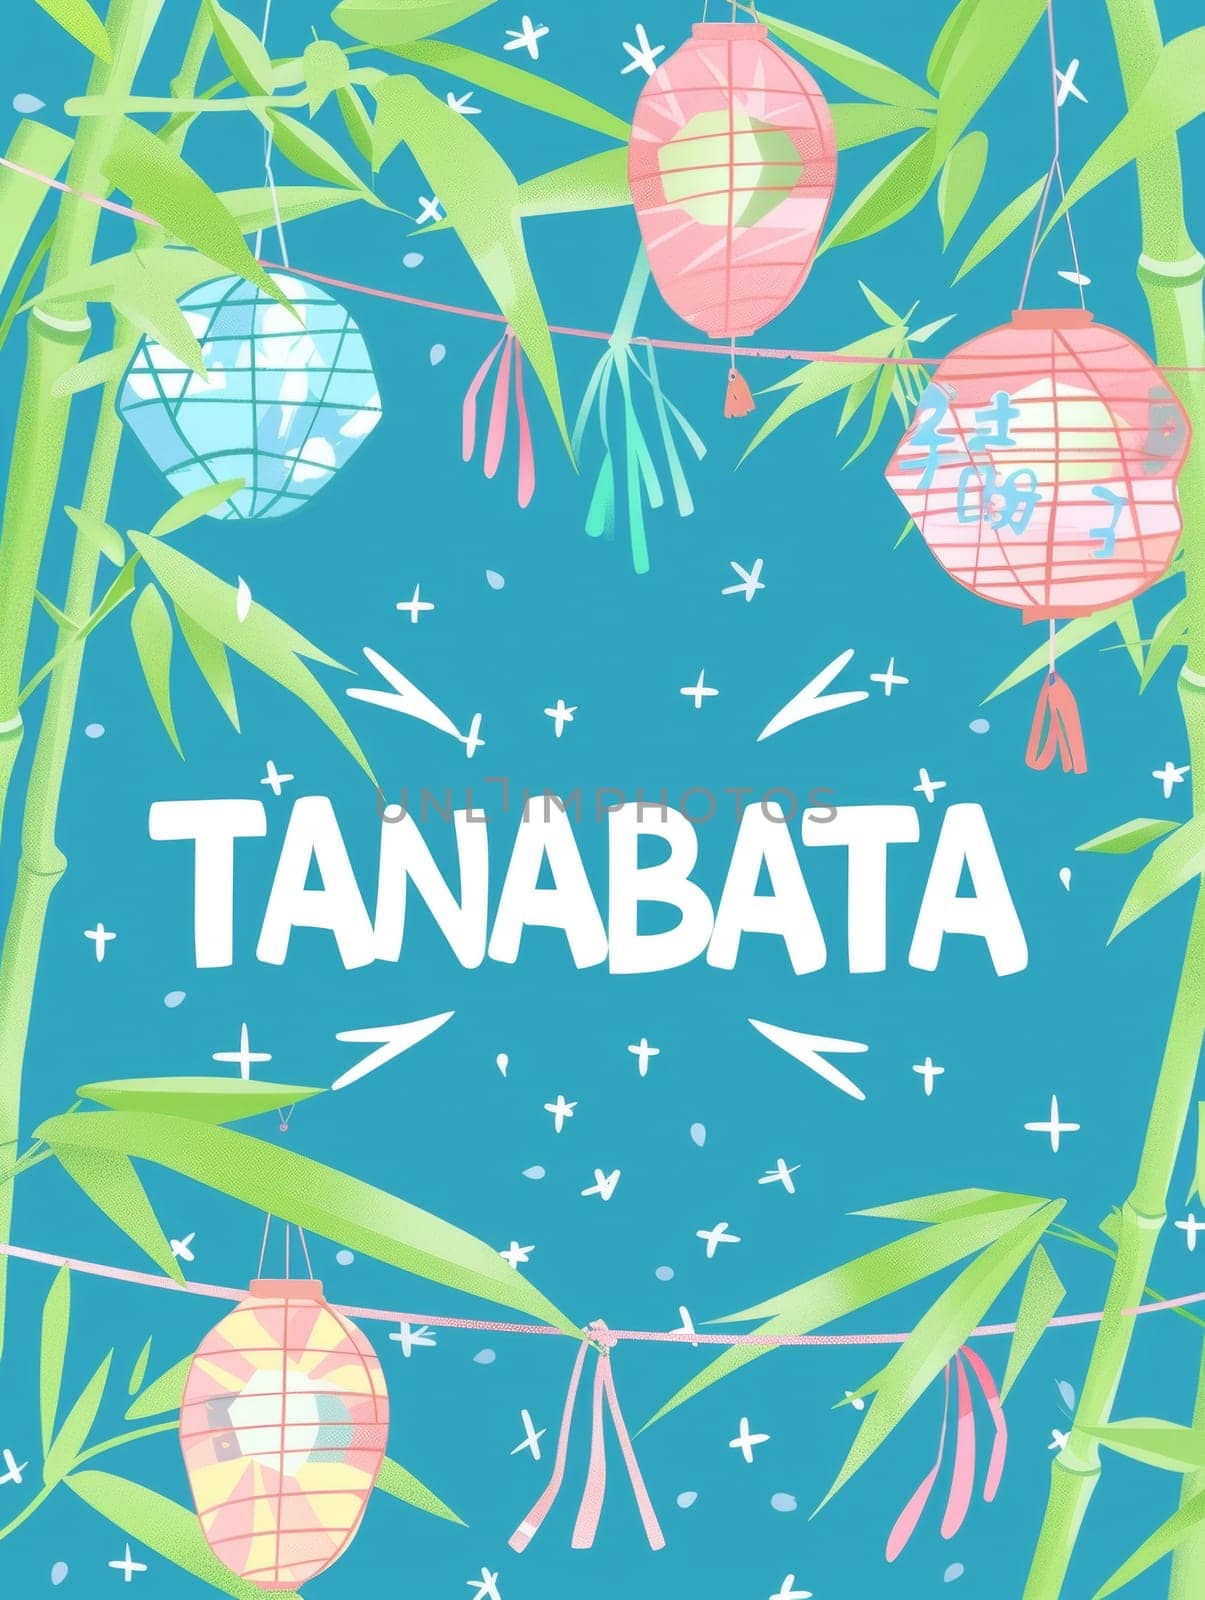 Enchanting bamboo lanterns float on a tranquil turquoise background, dotted with white stars for Tanabata, invoking the romance of the Japanese star festival. by sfinks